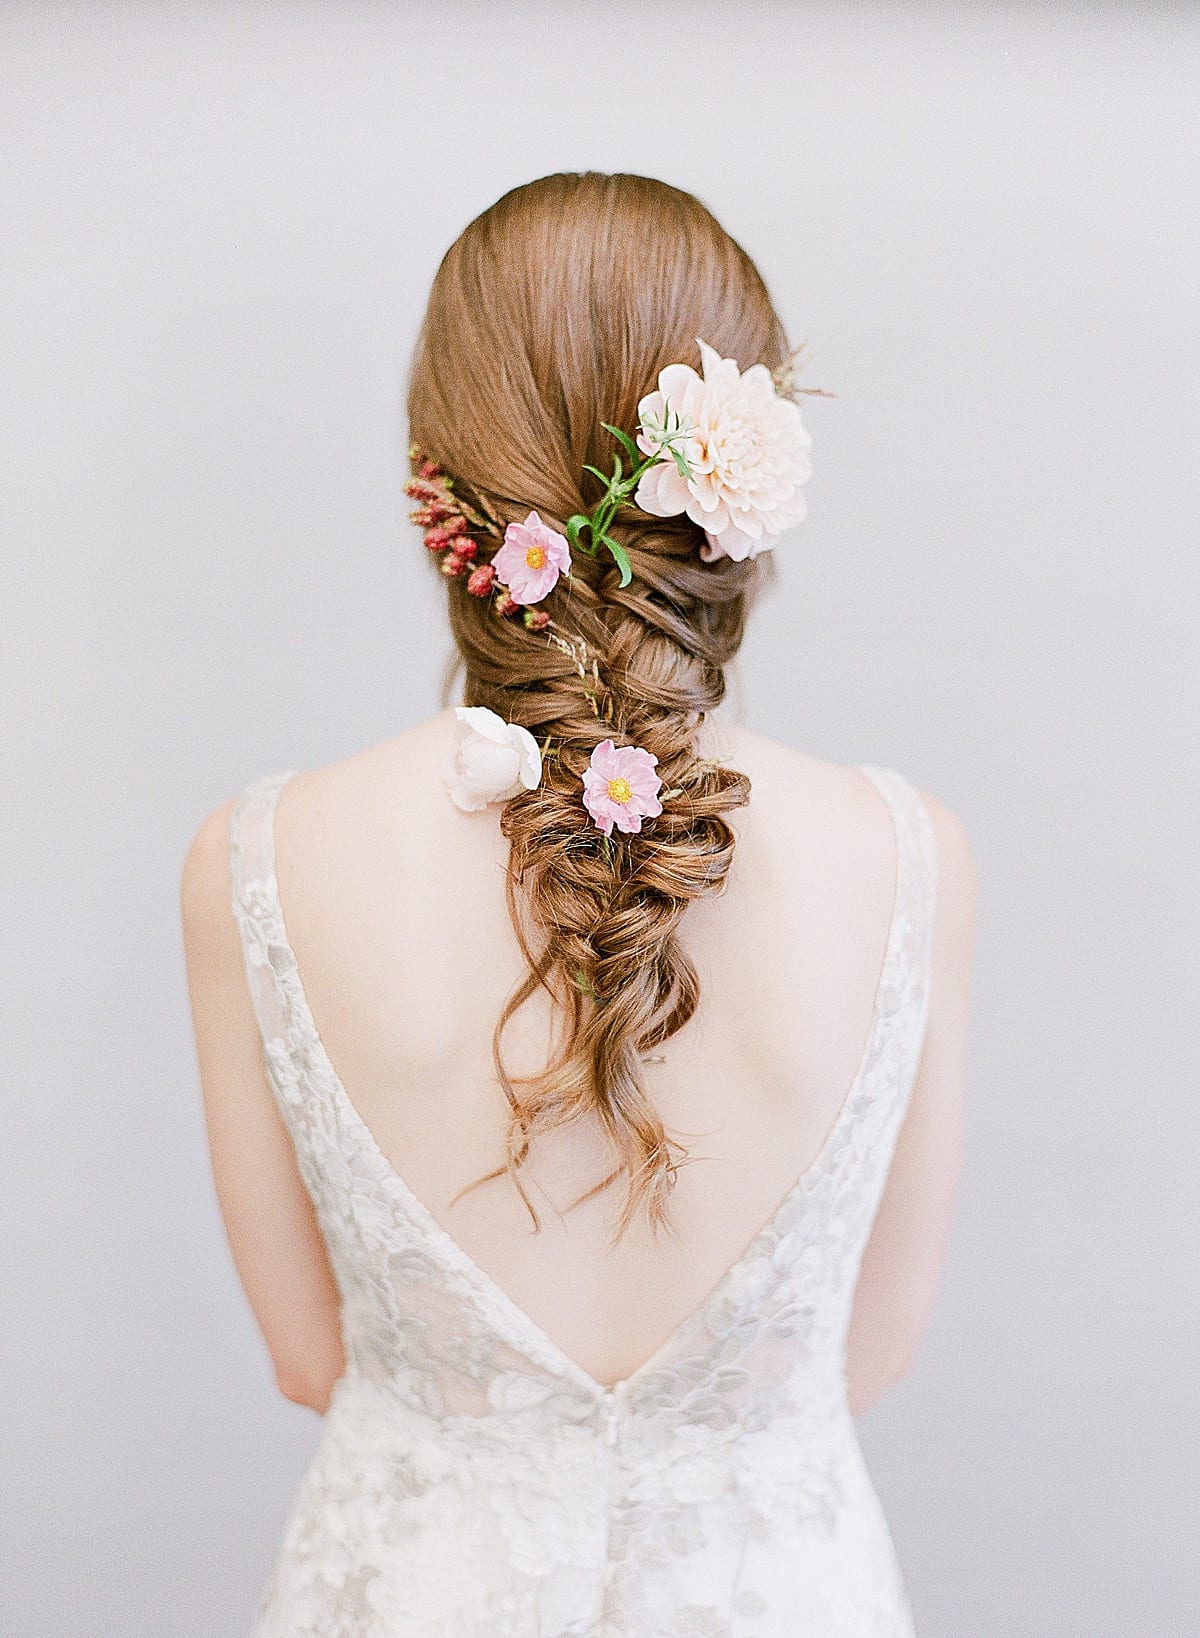 Bride in front of Gray Background with Flowers in Braided Hair Photo